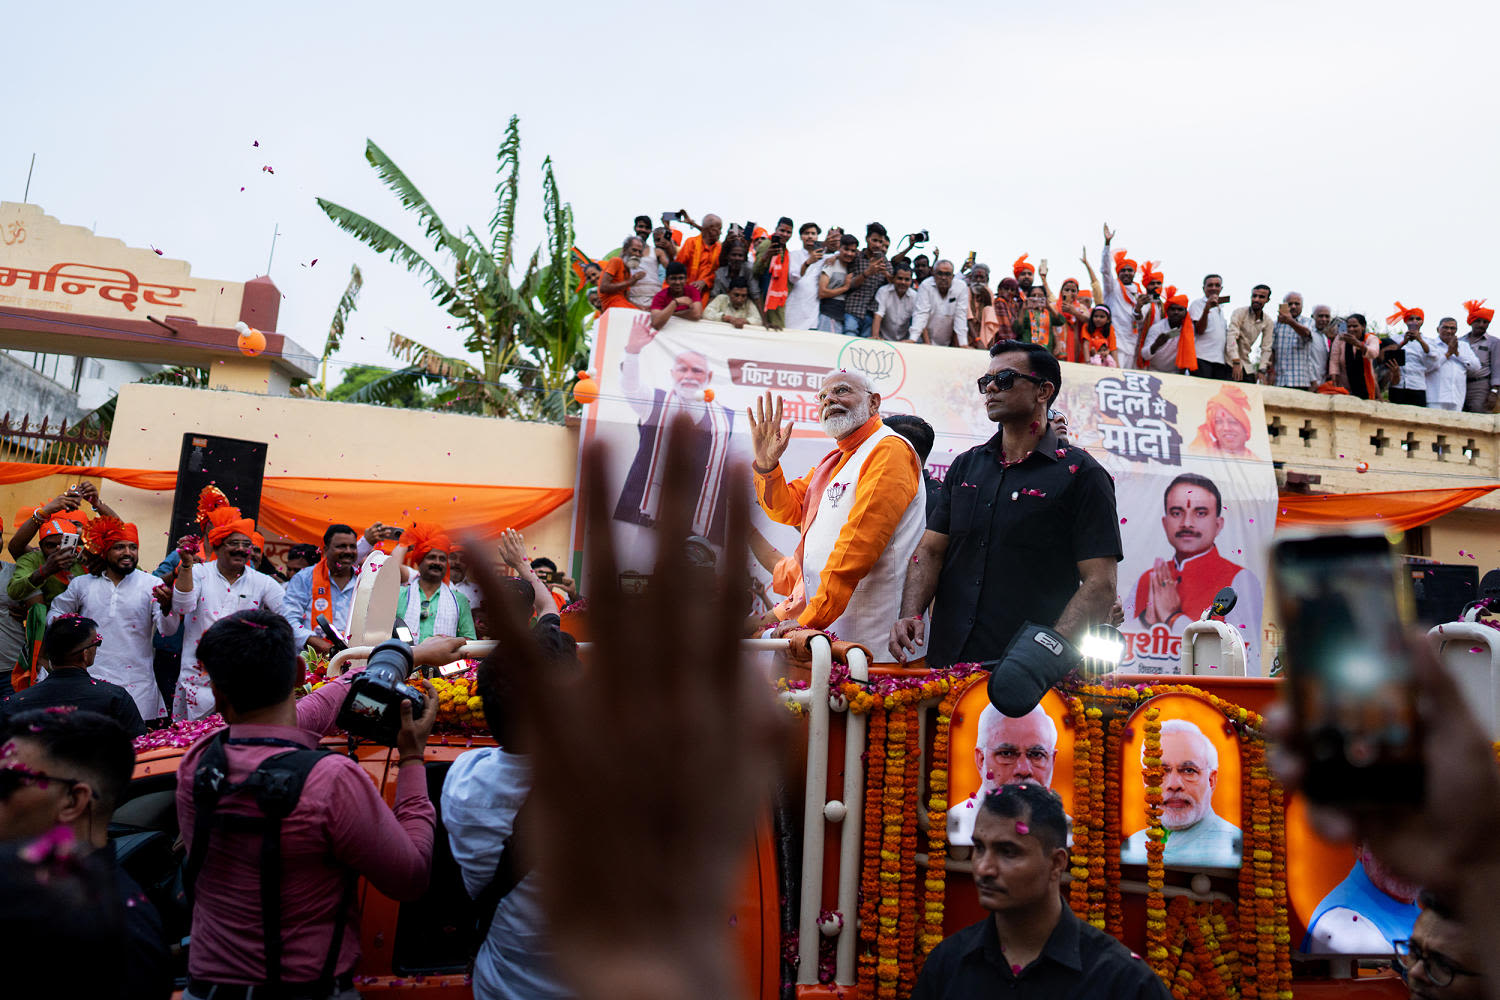 India hands Modi a surprise setback, with his majority in doubt in world's largest election